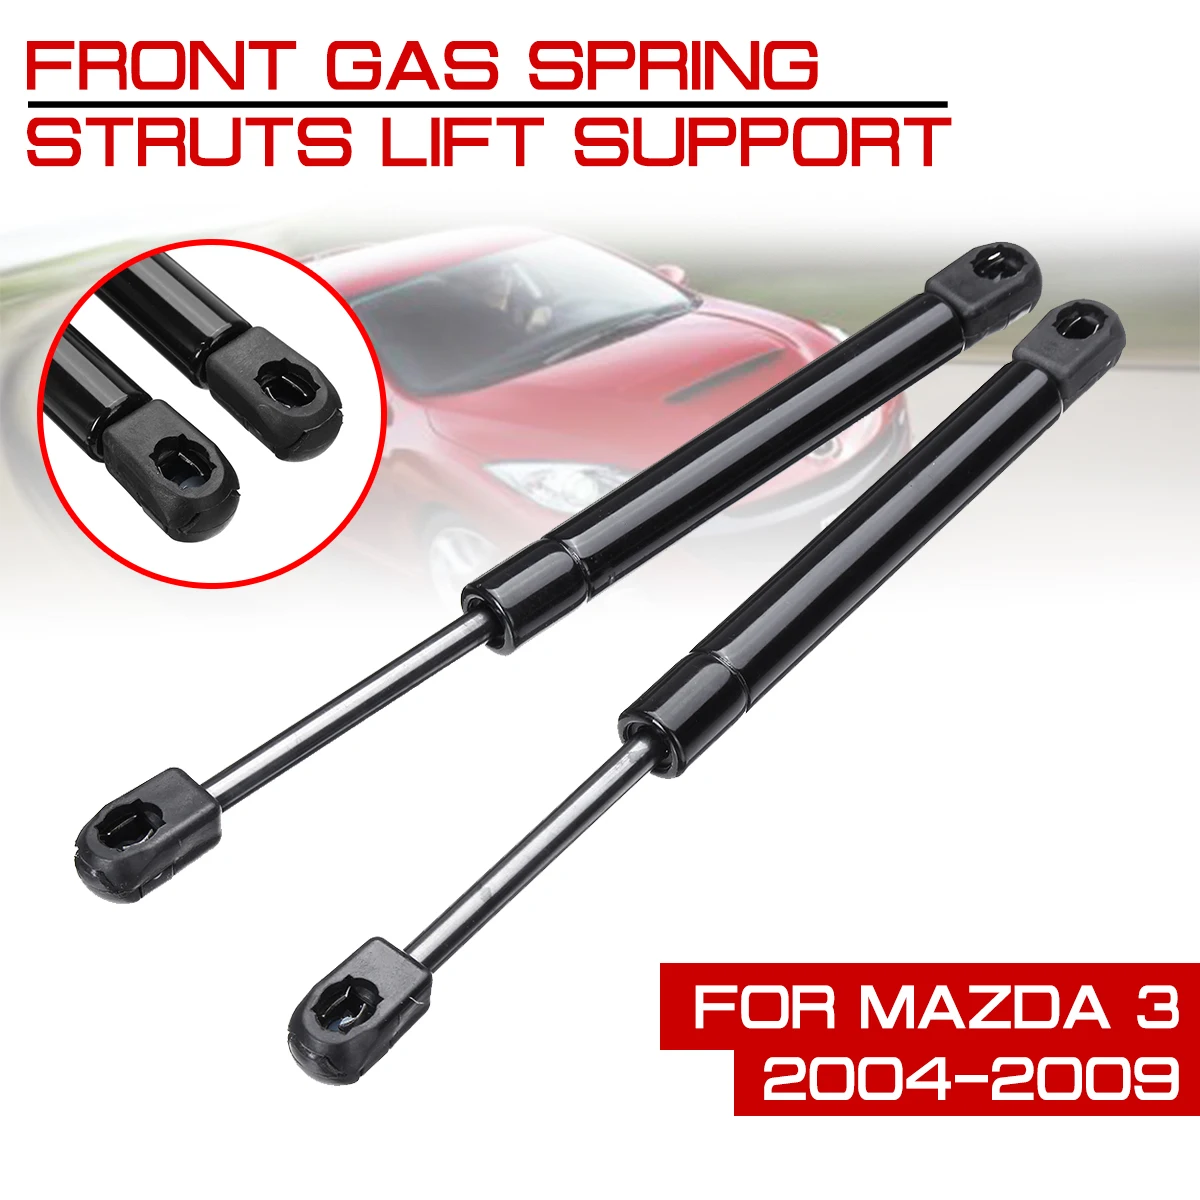 

BN8W56930 1 Pair Car Tailgate Trunk Boot Gas Spring Strut Bars Support Lift For Mazda 3 2004-2009 BN8V56930 BN8W56930A